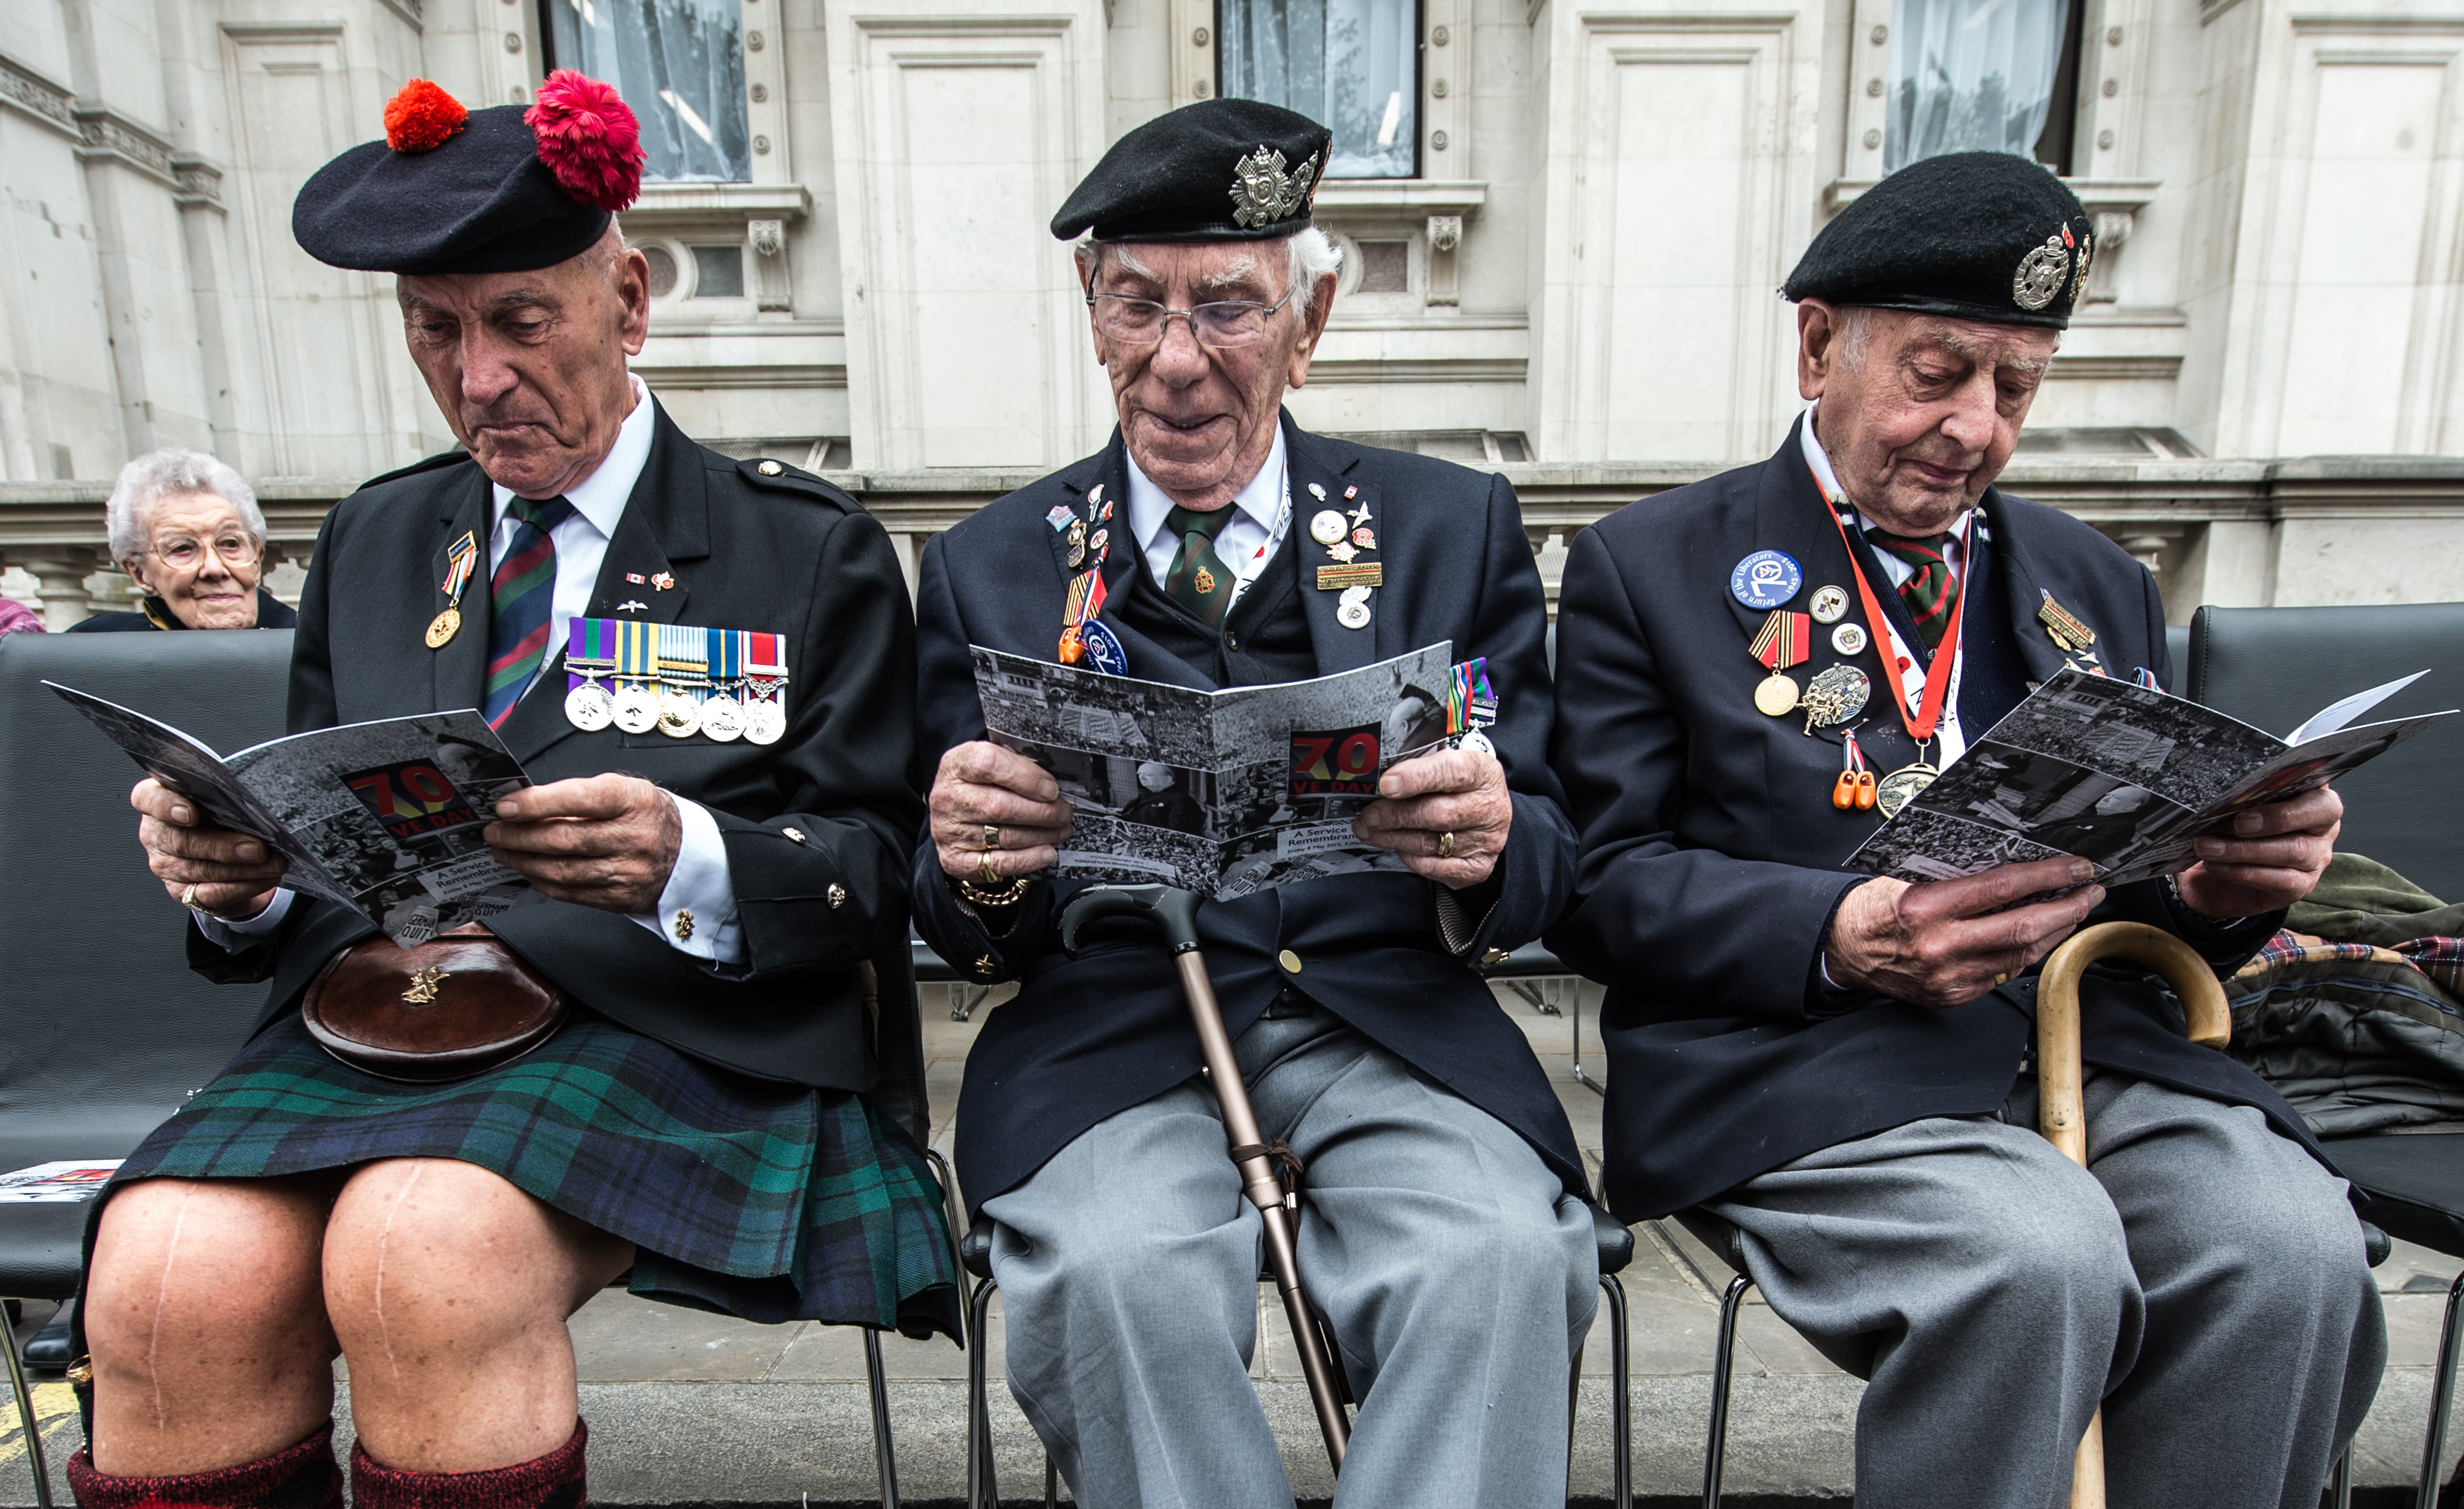 Three WWII Veterans are sat on chairs read the program for the VE Day Service ahead of the ceremony.